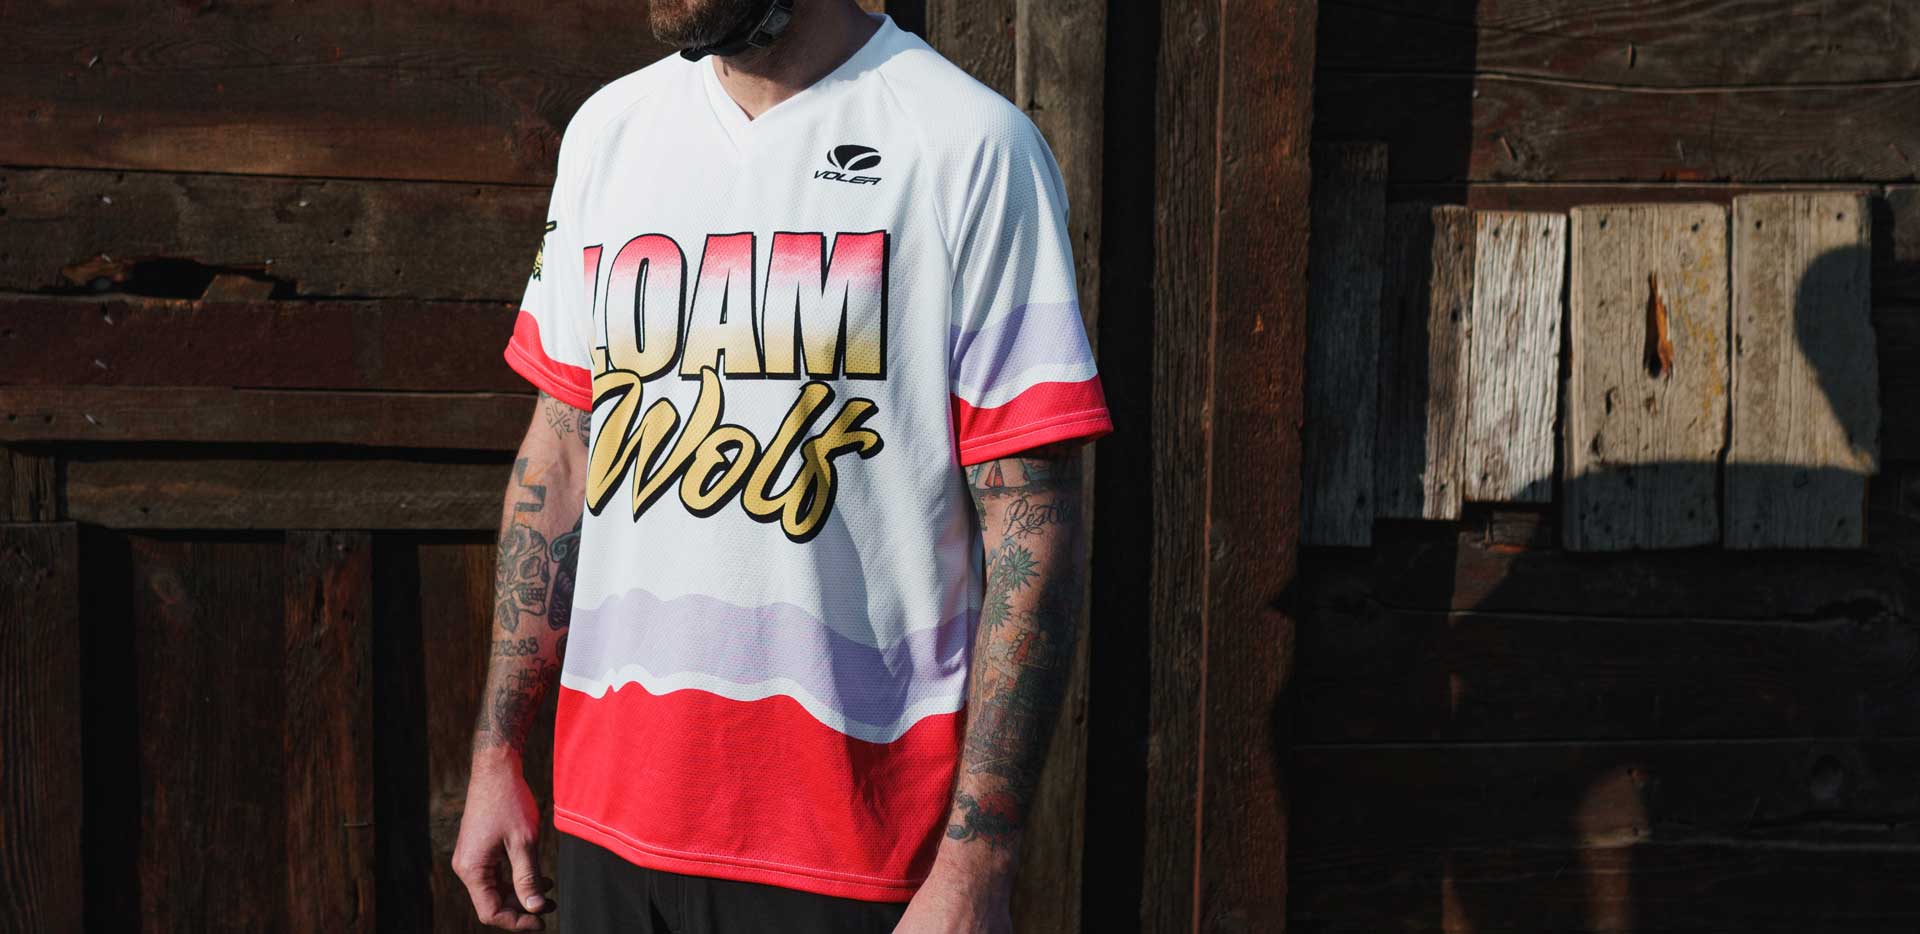 The Loam Wolf x Voler Jersey Collab